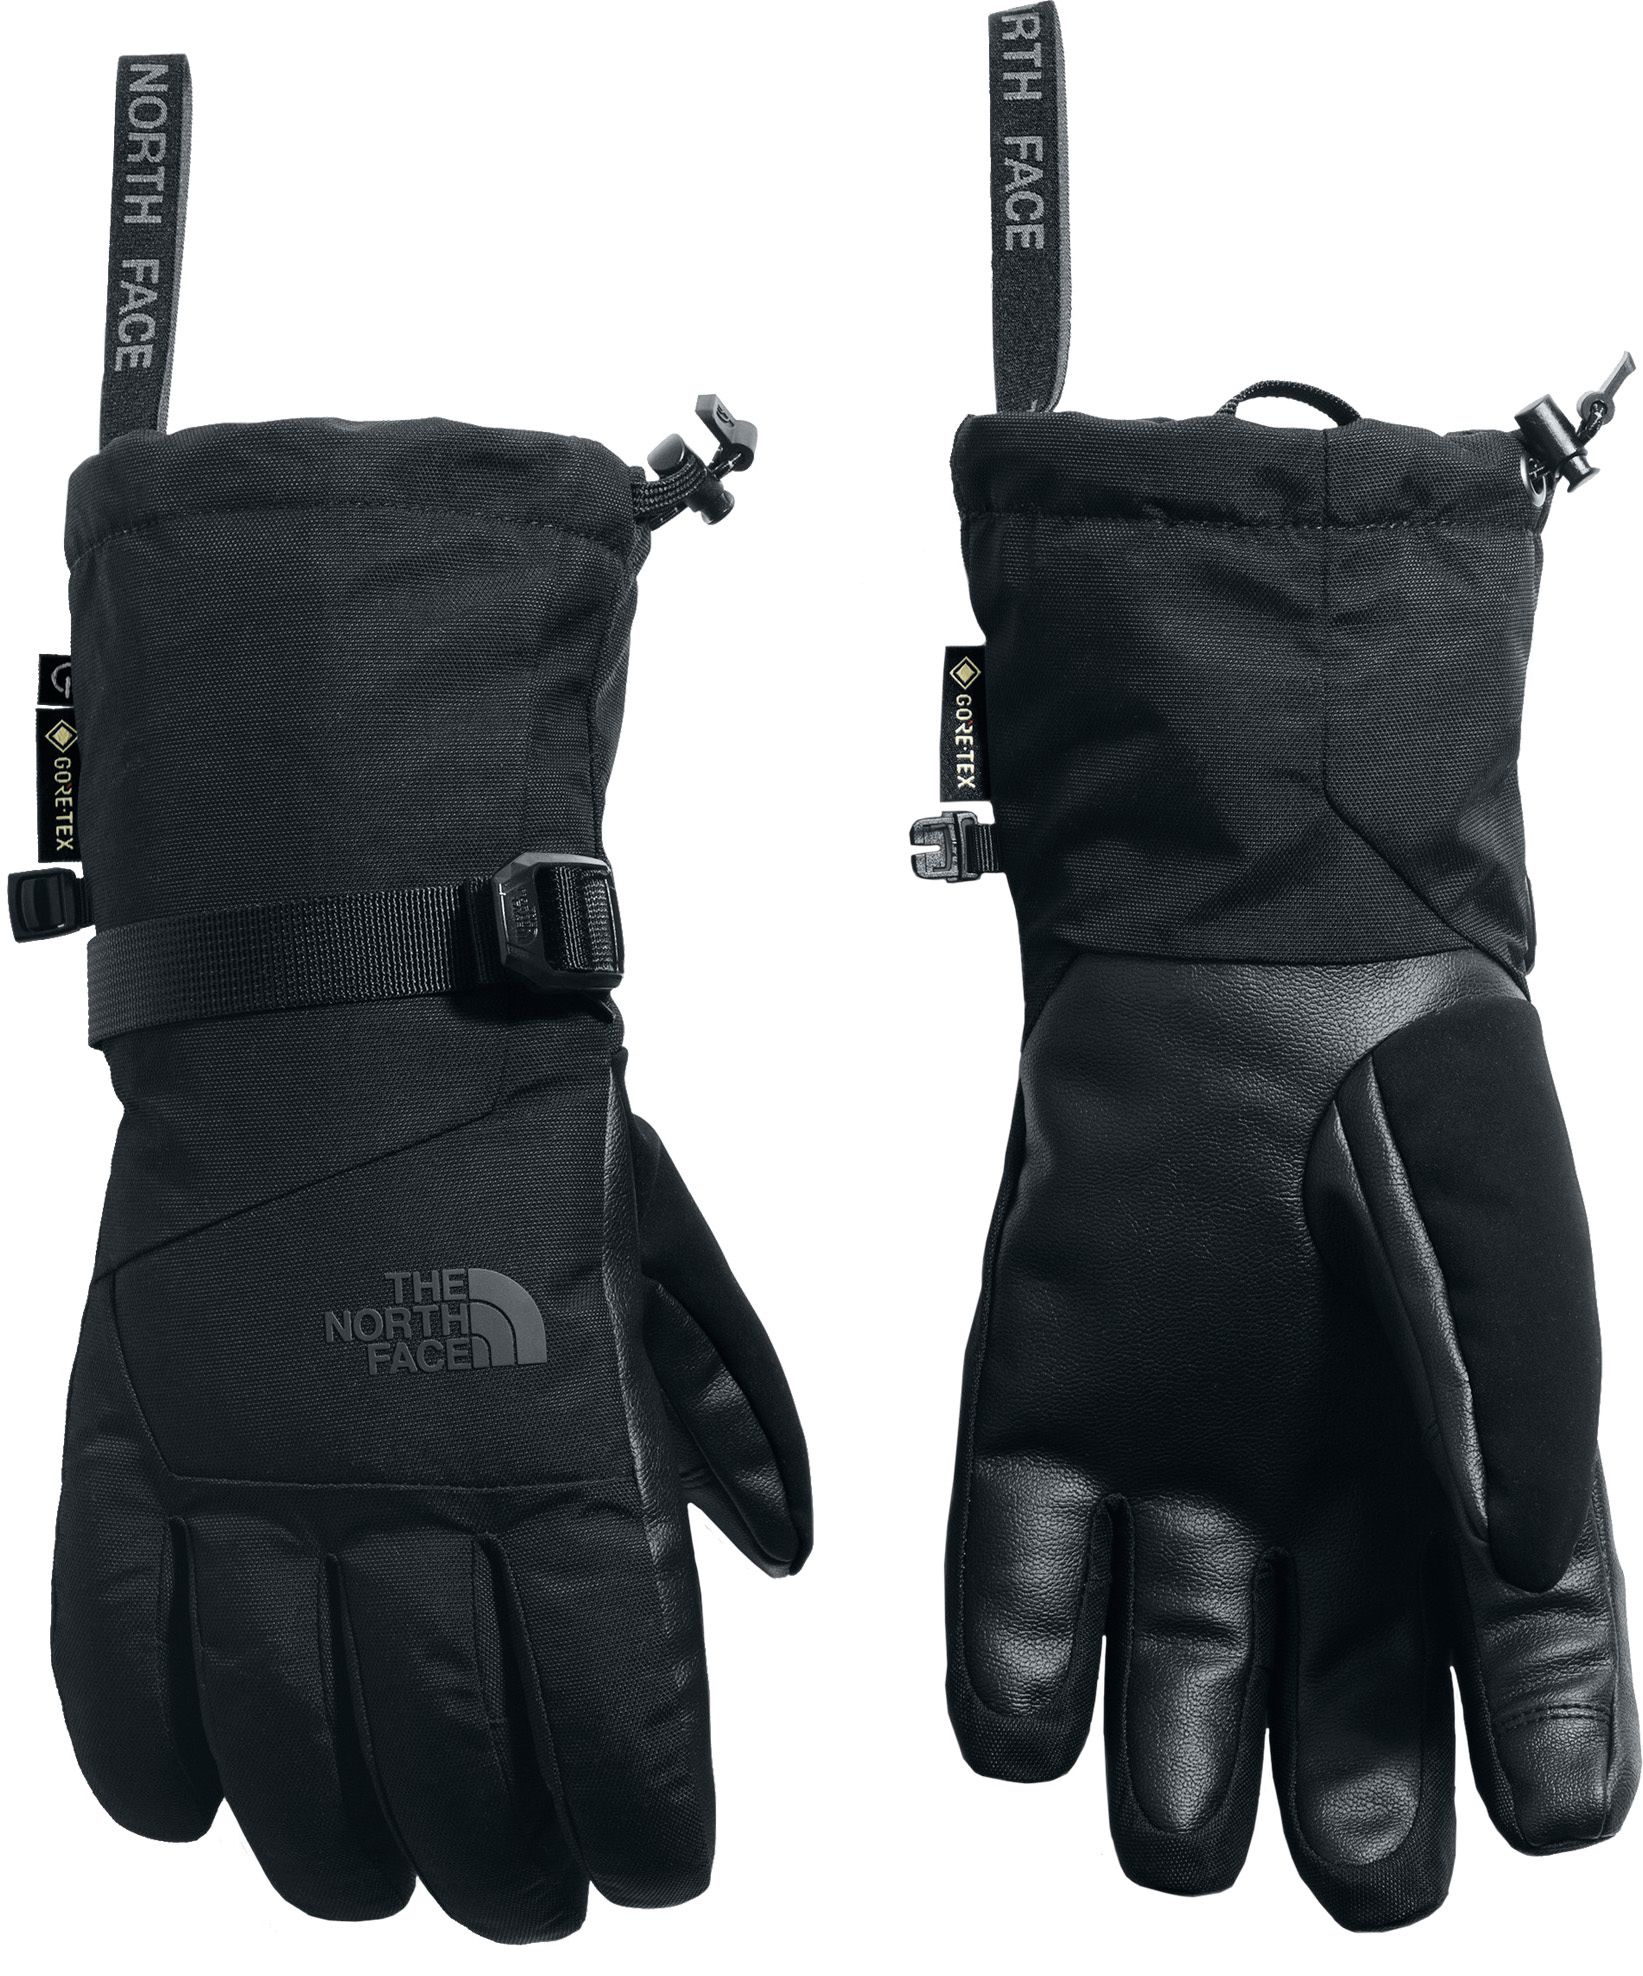 north face snow gloves